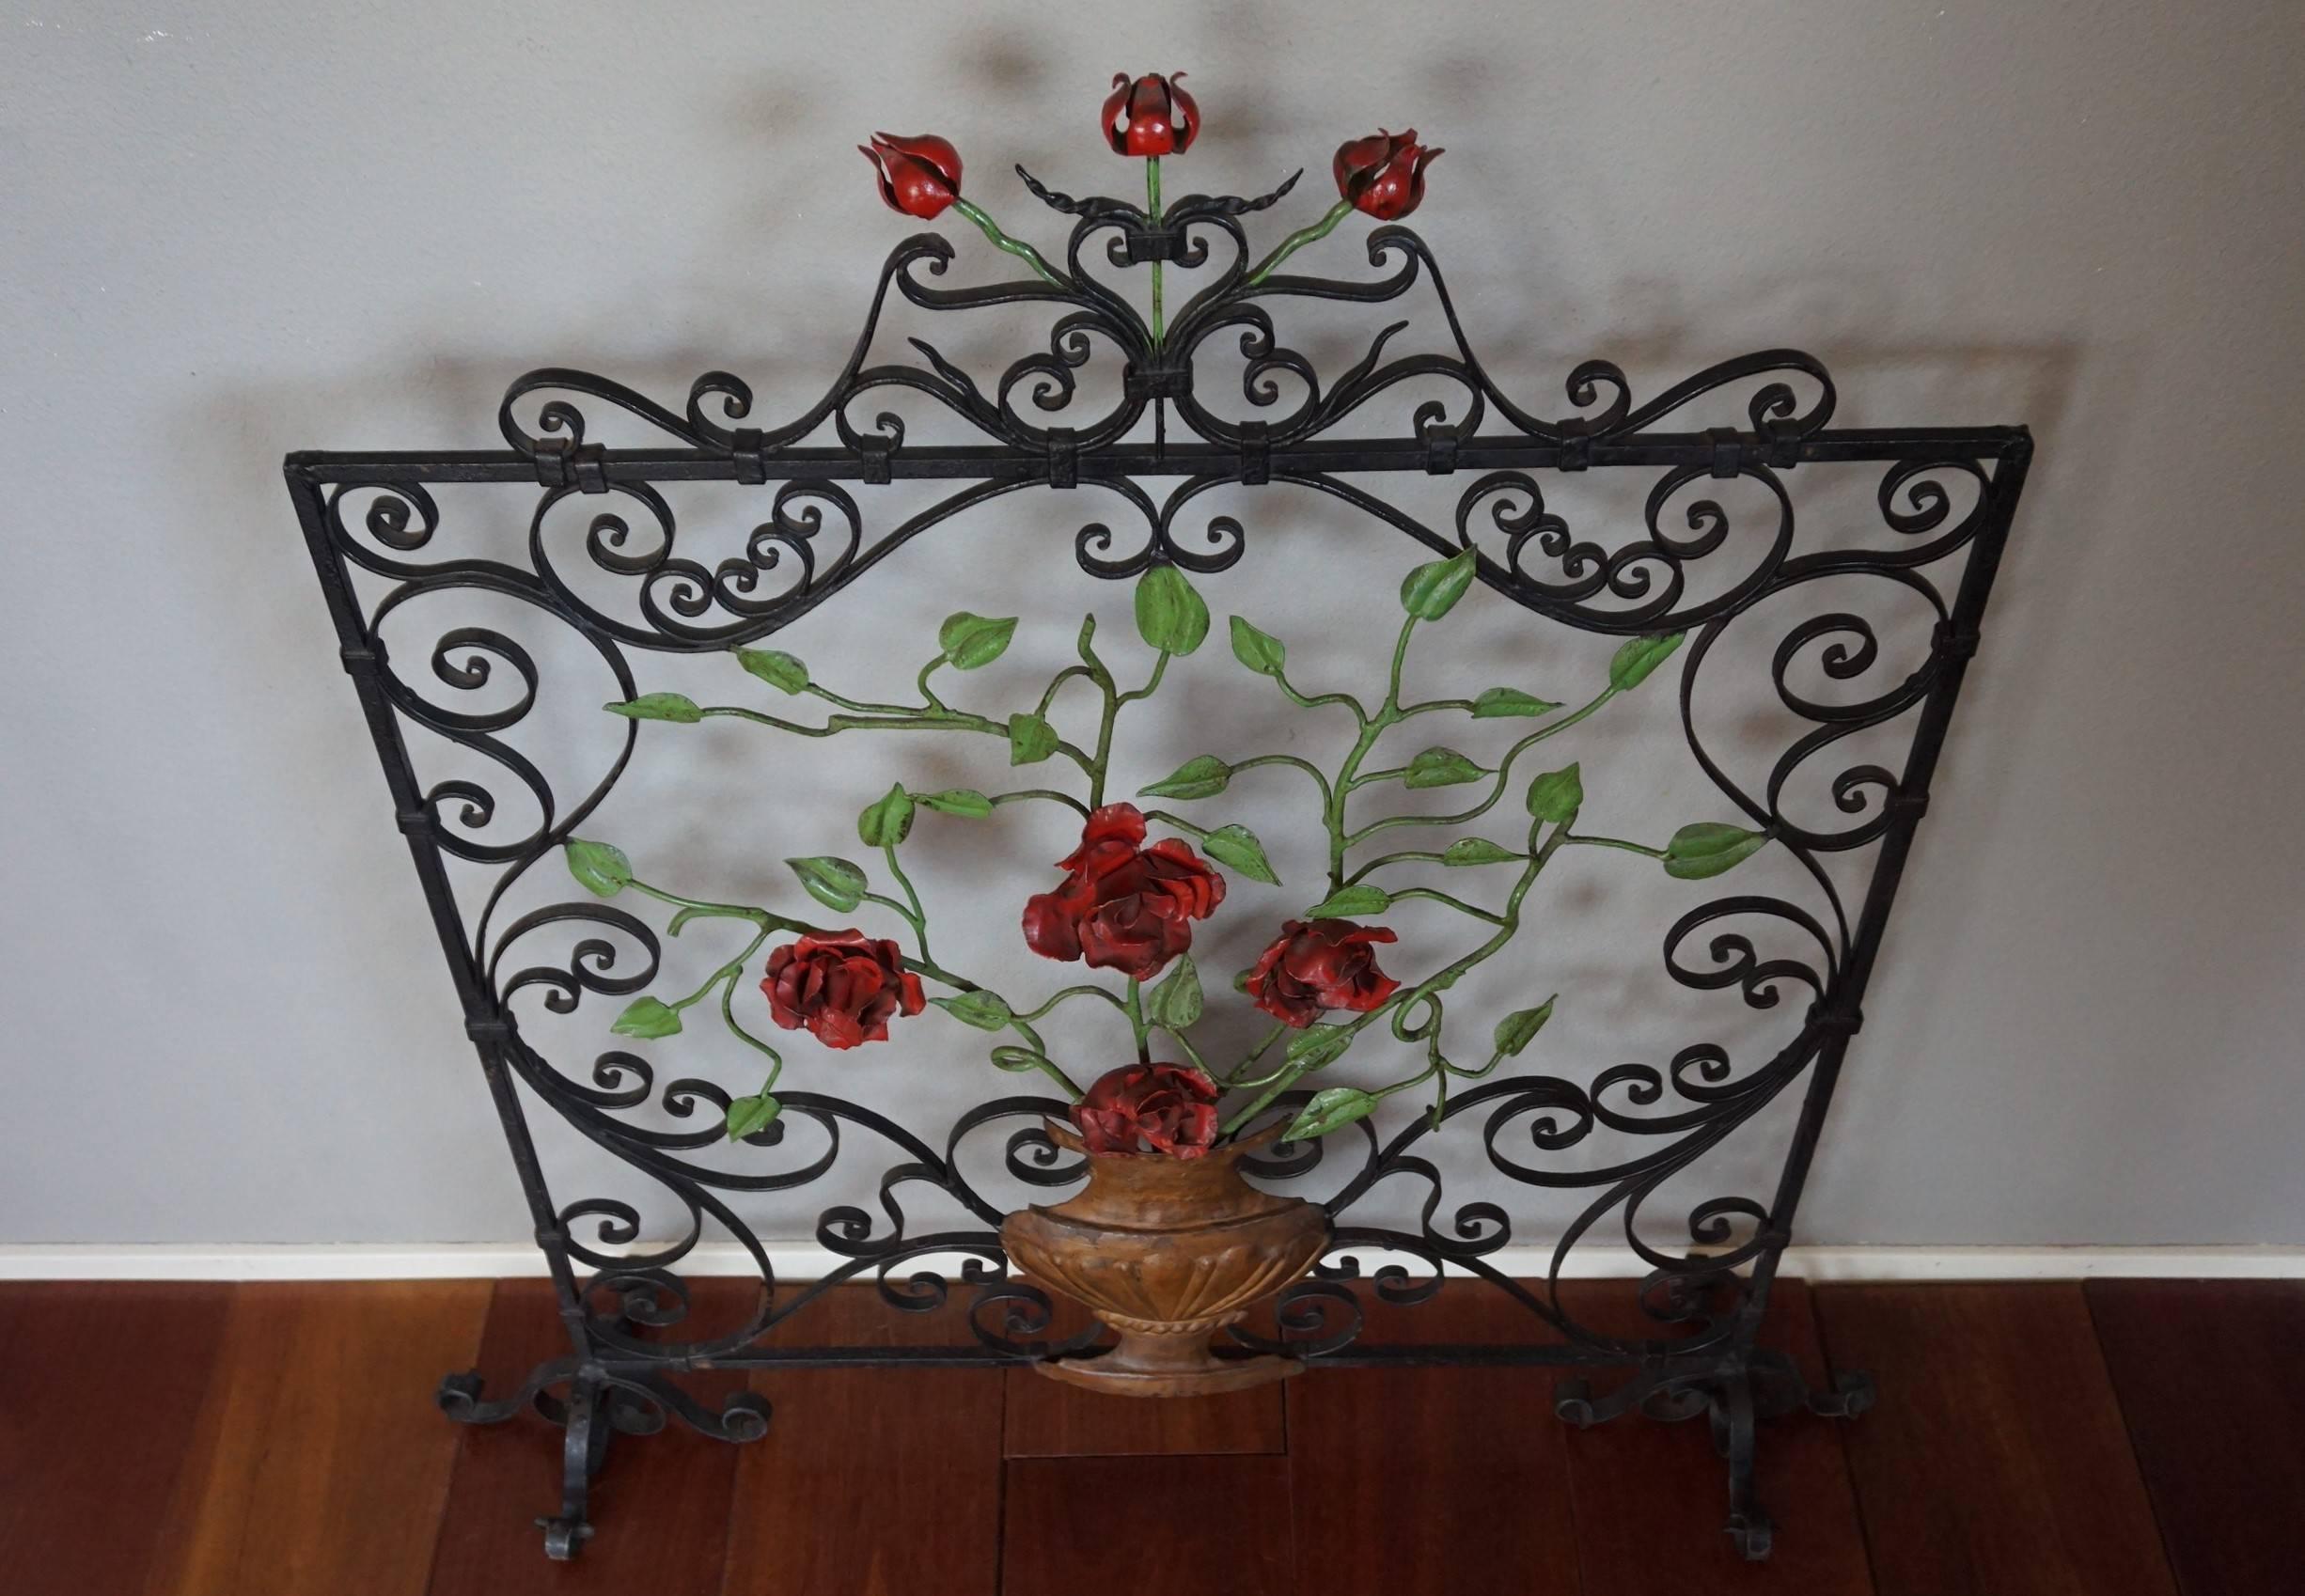 Highly decorative and all hand-crafted, ironwork firescreen.

We can think of more than one way to use this fantastically decorative screen. Around the turn of the century it would have been made to stand in front of the fireplace in the warmer part